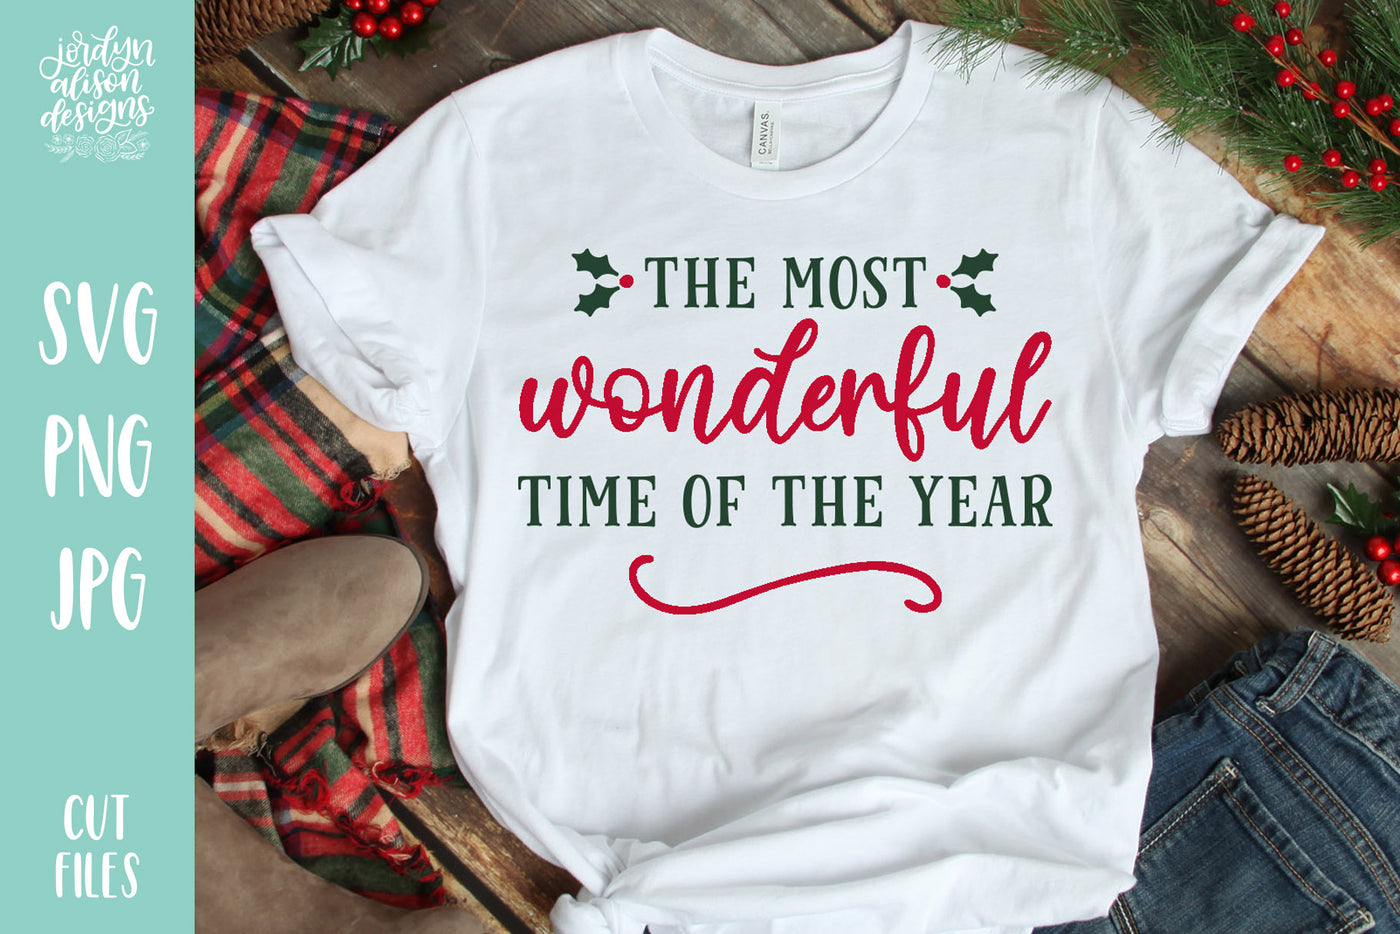 White T-shirt with handwritten text "Most Wonderful Time of Year